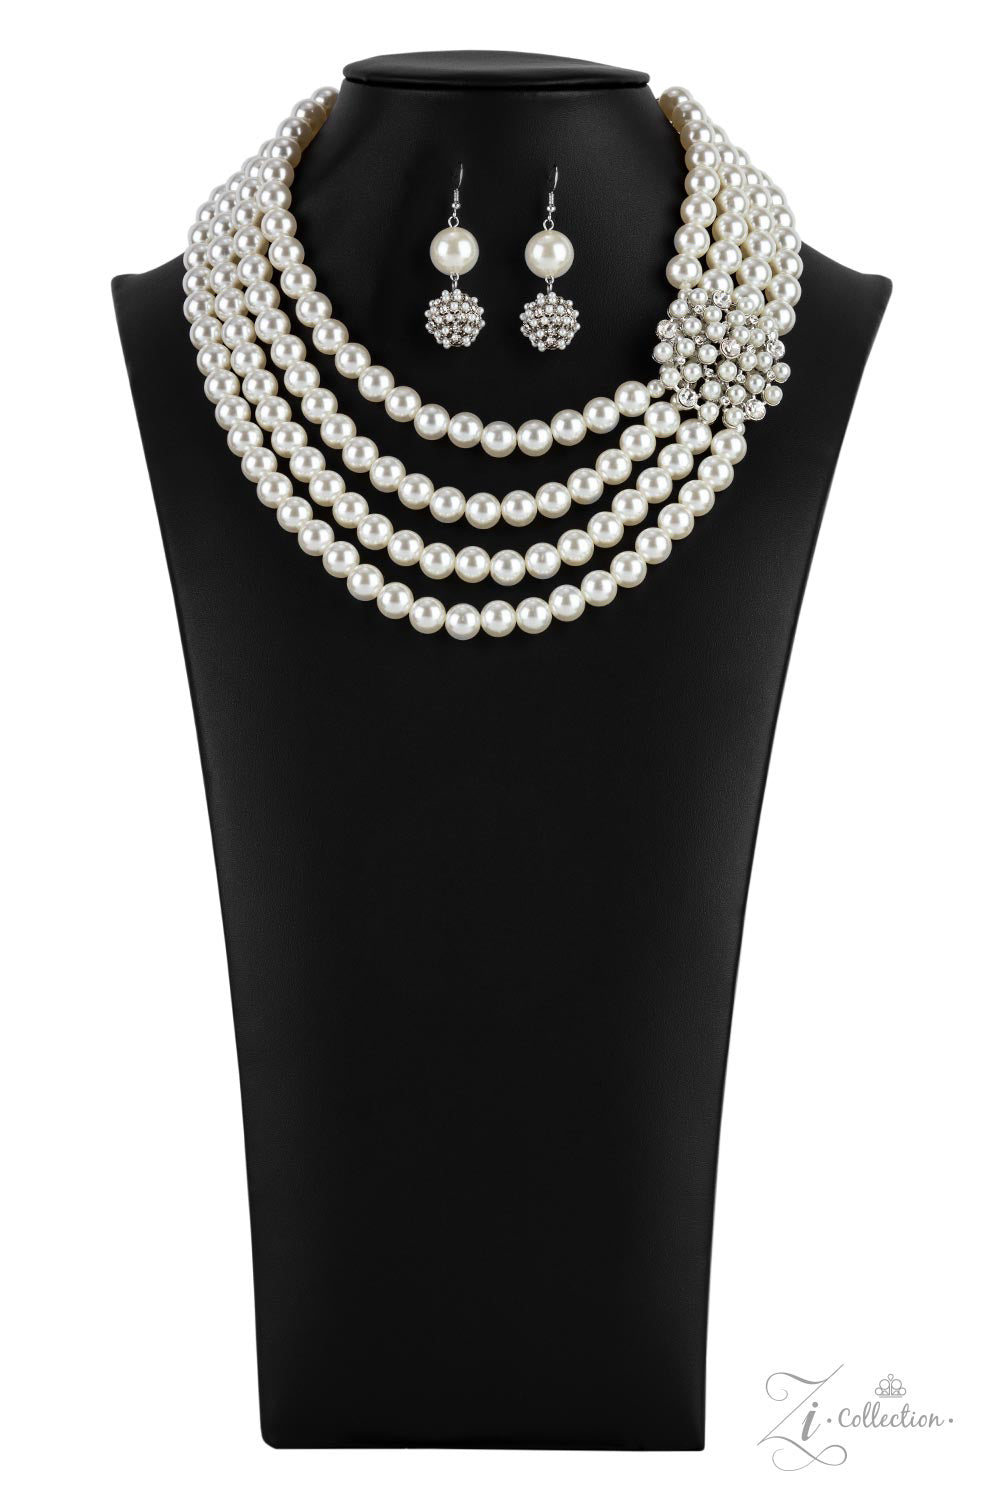 Paparazzi Romantic - Necklace & Earrings - Zi Collection 2021